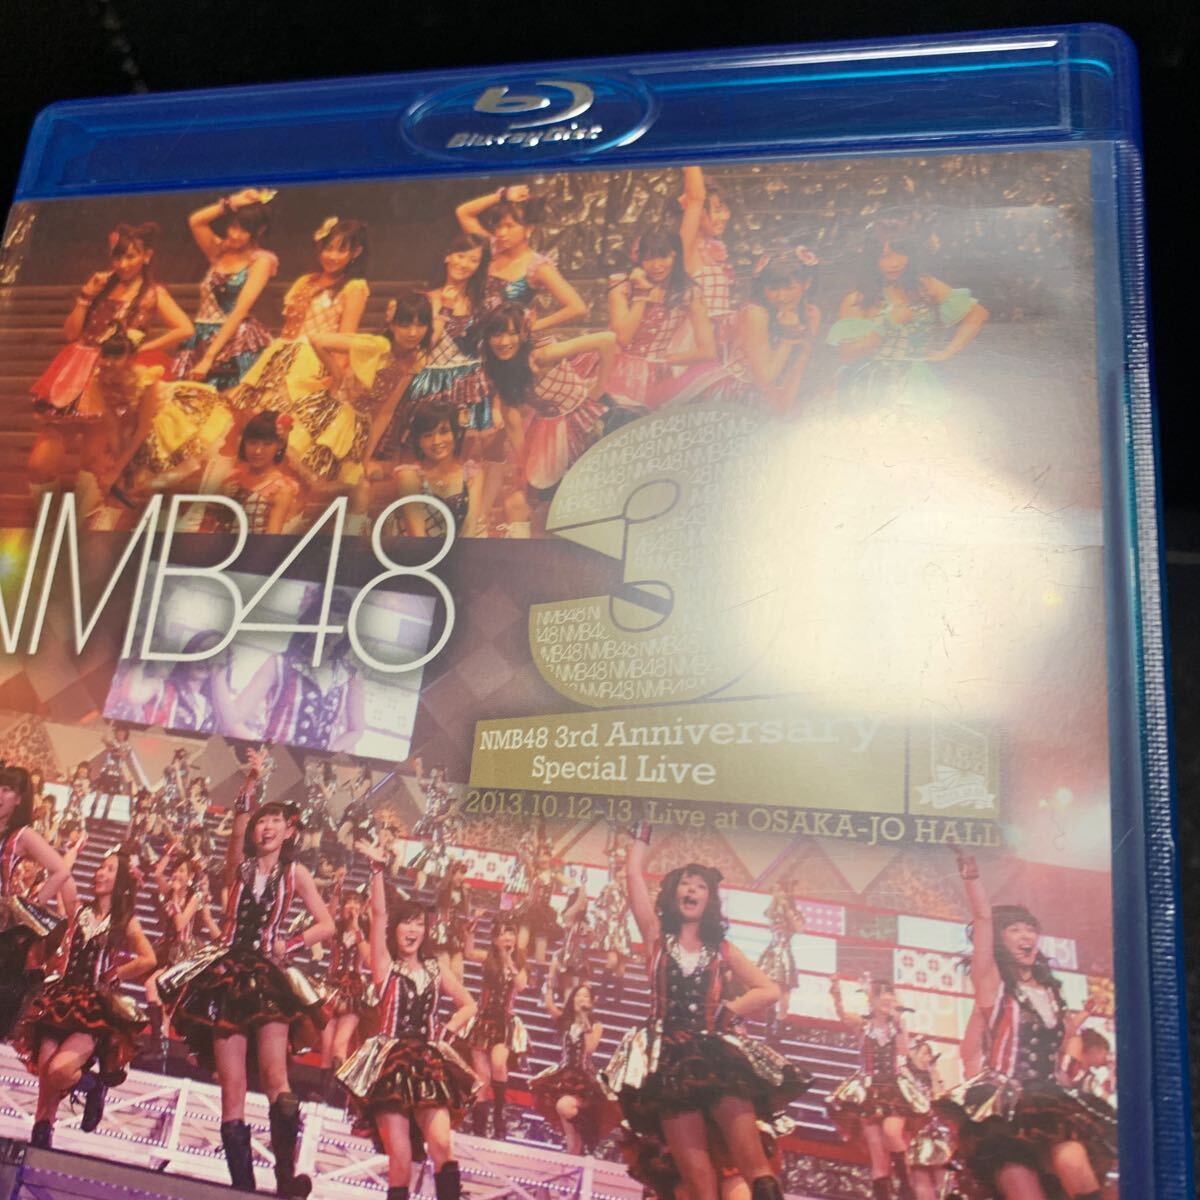 NMB48 3rd Anniversary Special Live(Blu-ray Disc)ブルーレイの画像9